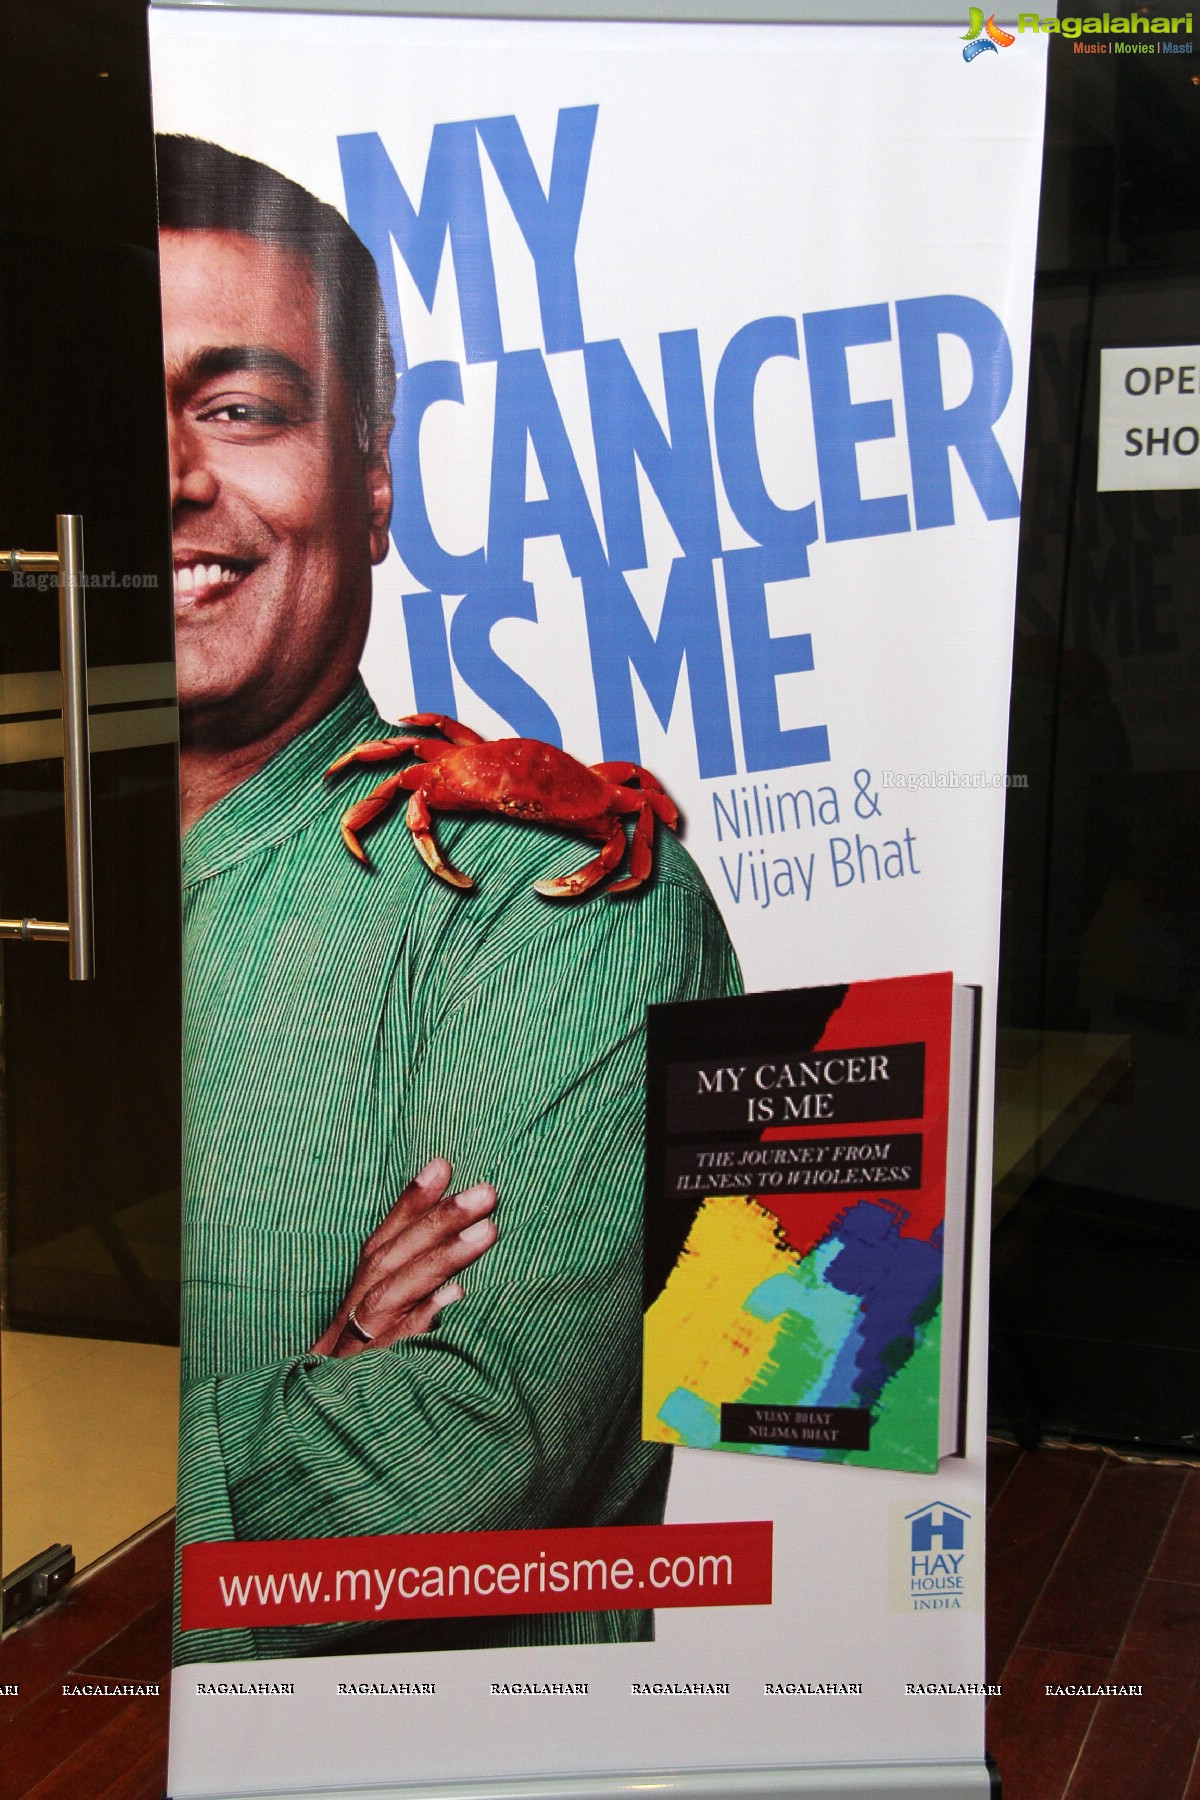 'My Cancer is Me: The Journey from Illness to Wholeness' Book Reading Session